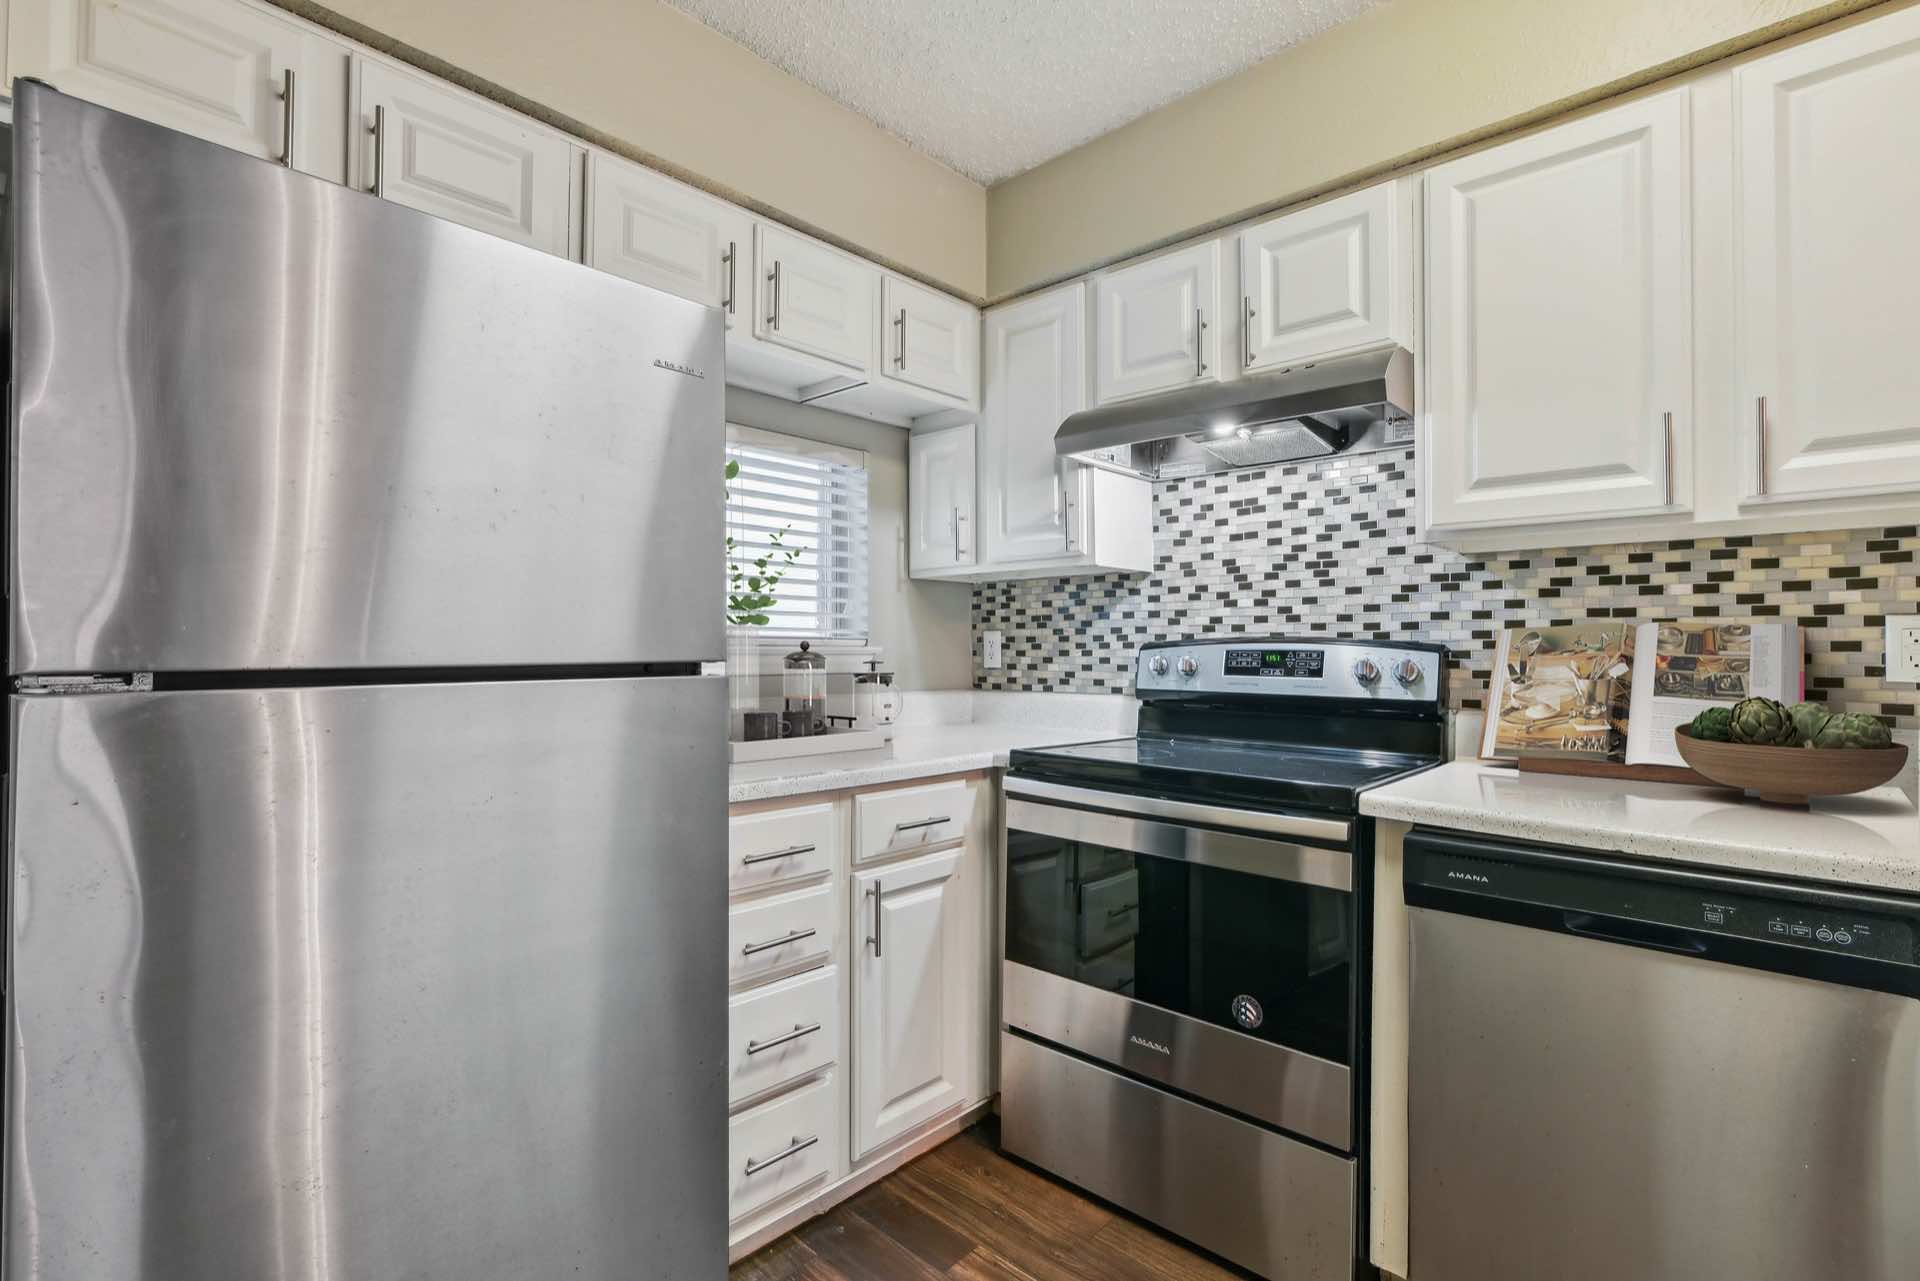 Kitchen with tile backsplash and stainless steel appliances